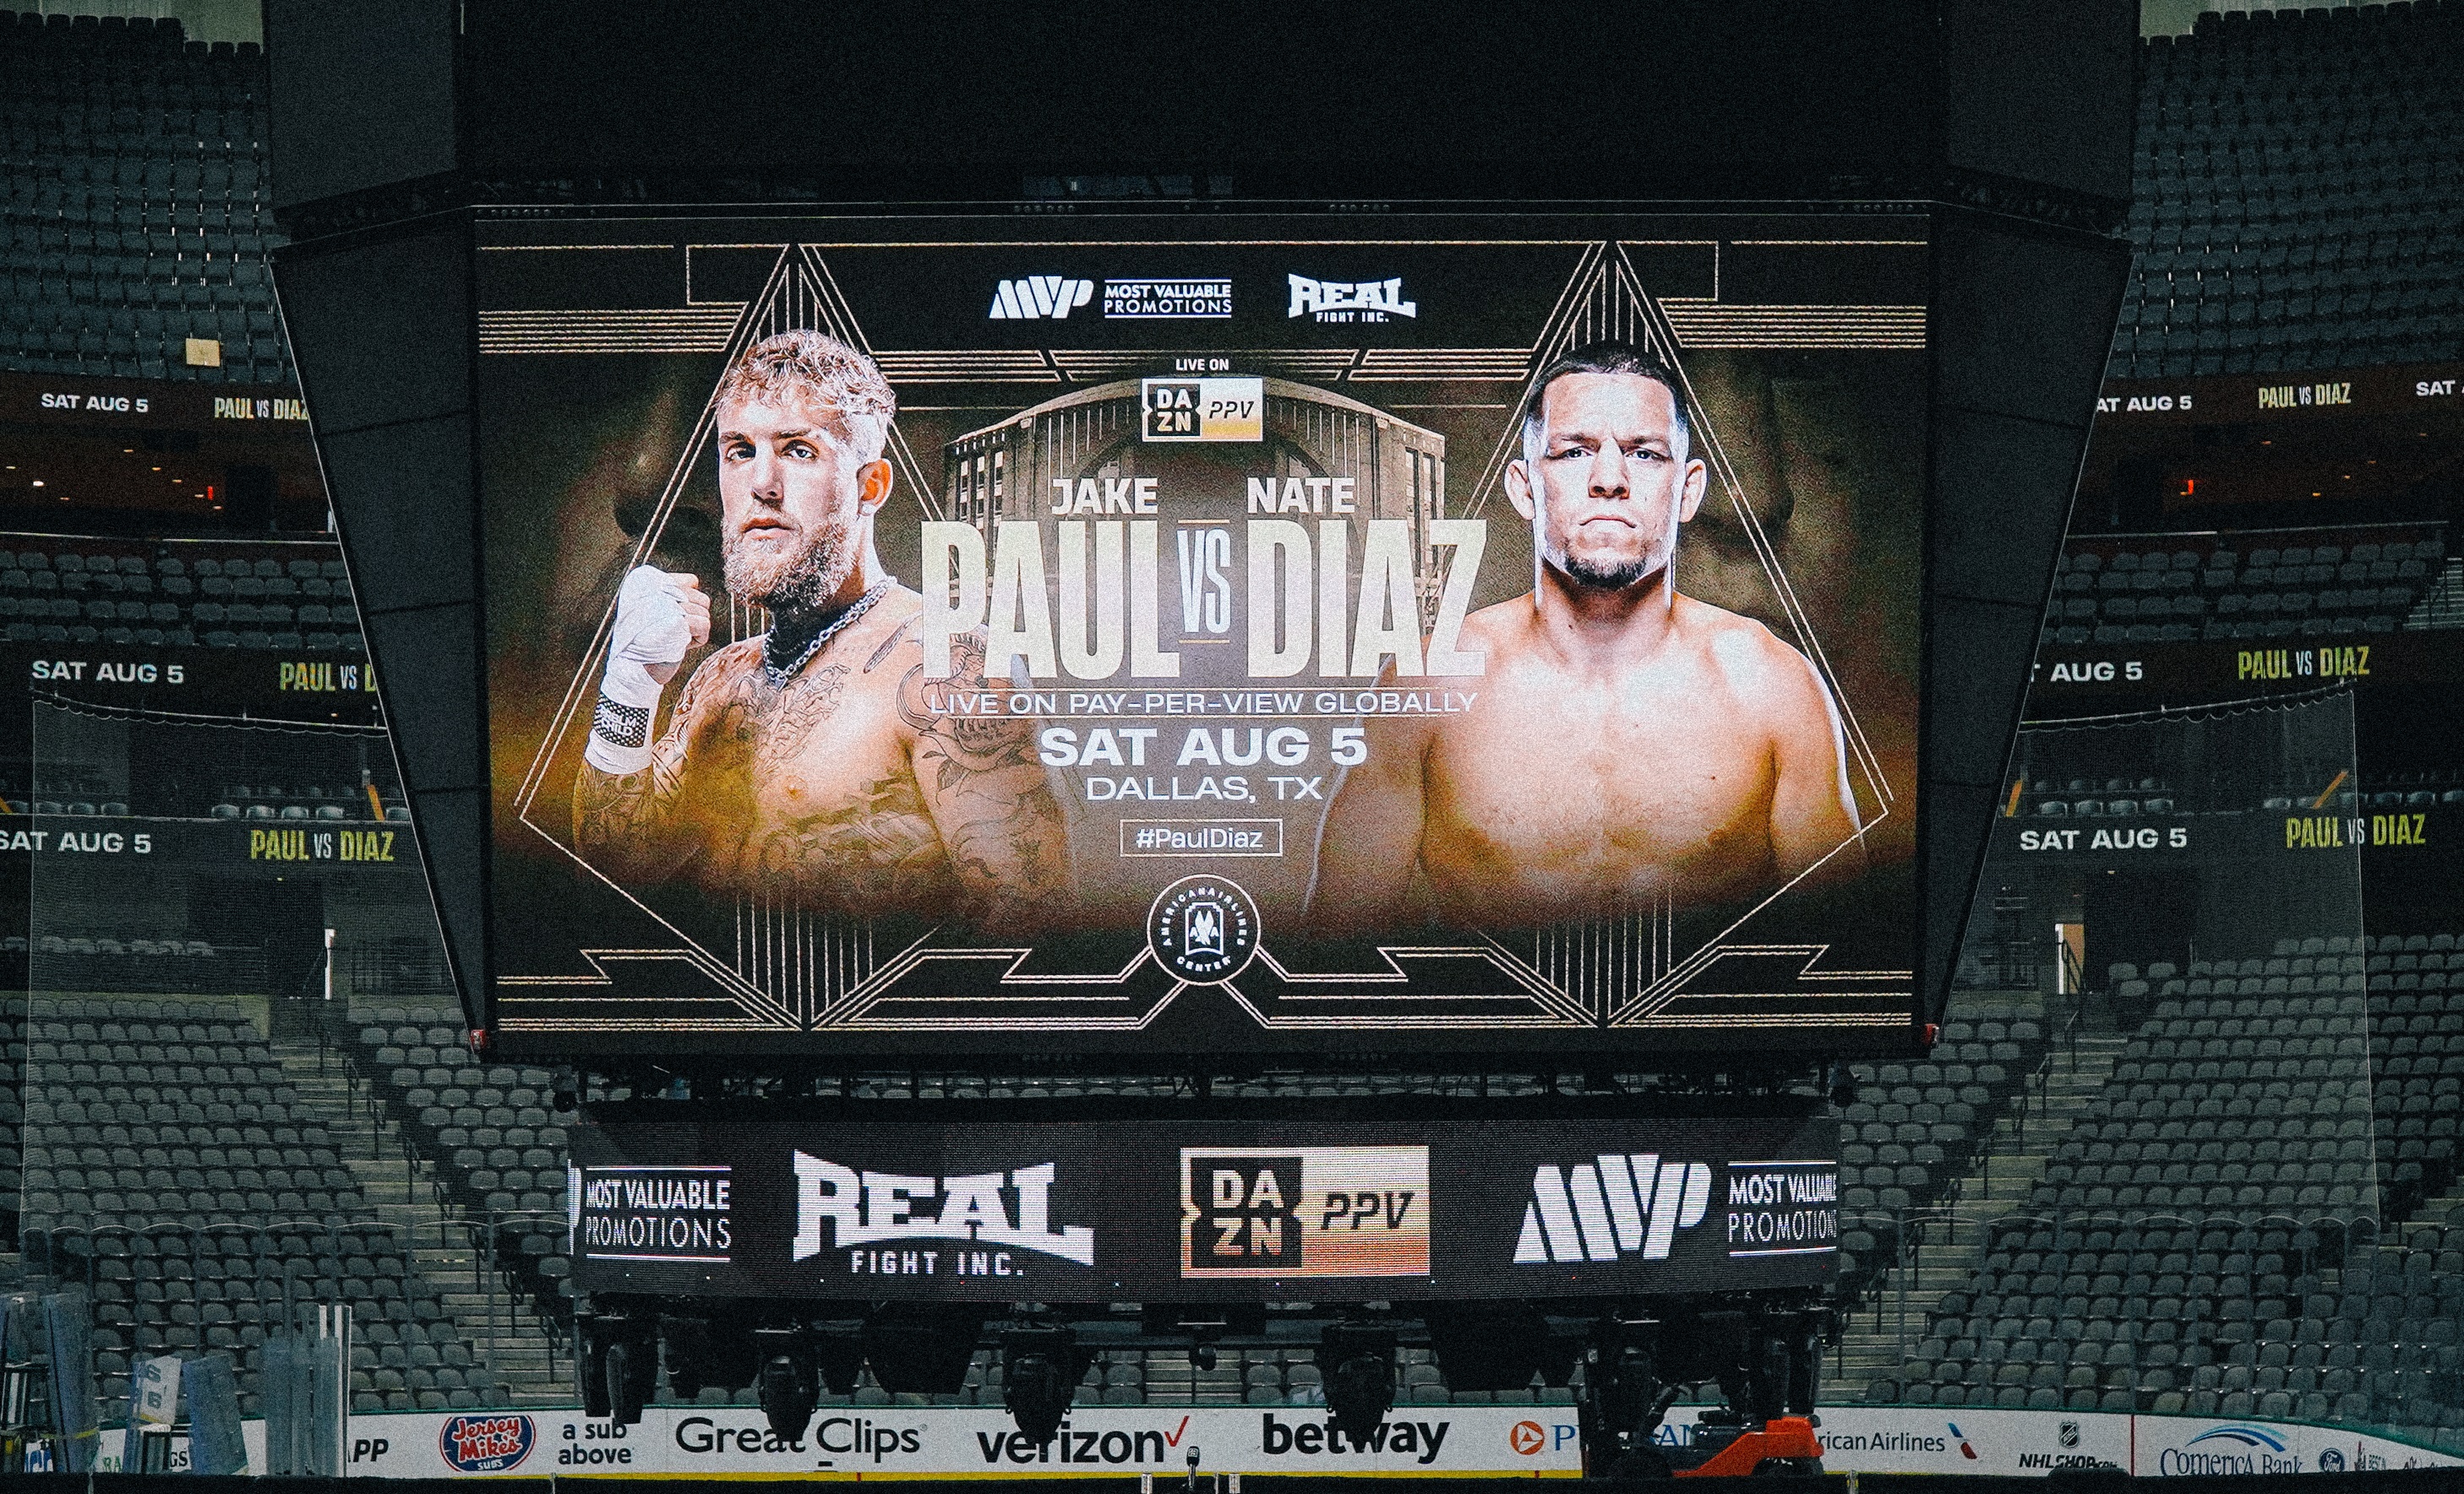 How to watch Jake Paul-Nate Diaz Streaming, start time, fight card and more